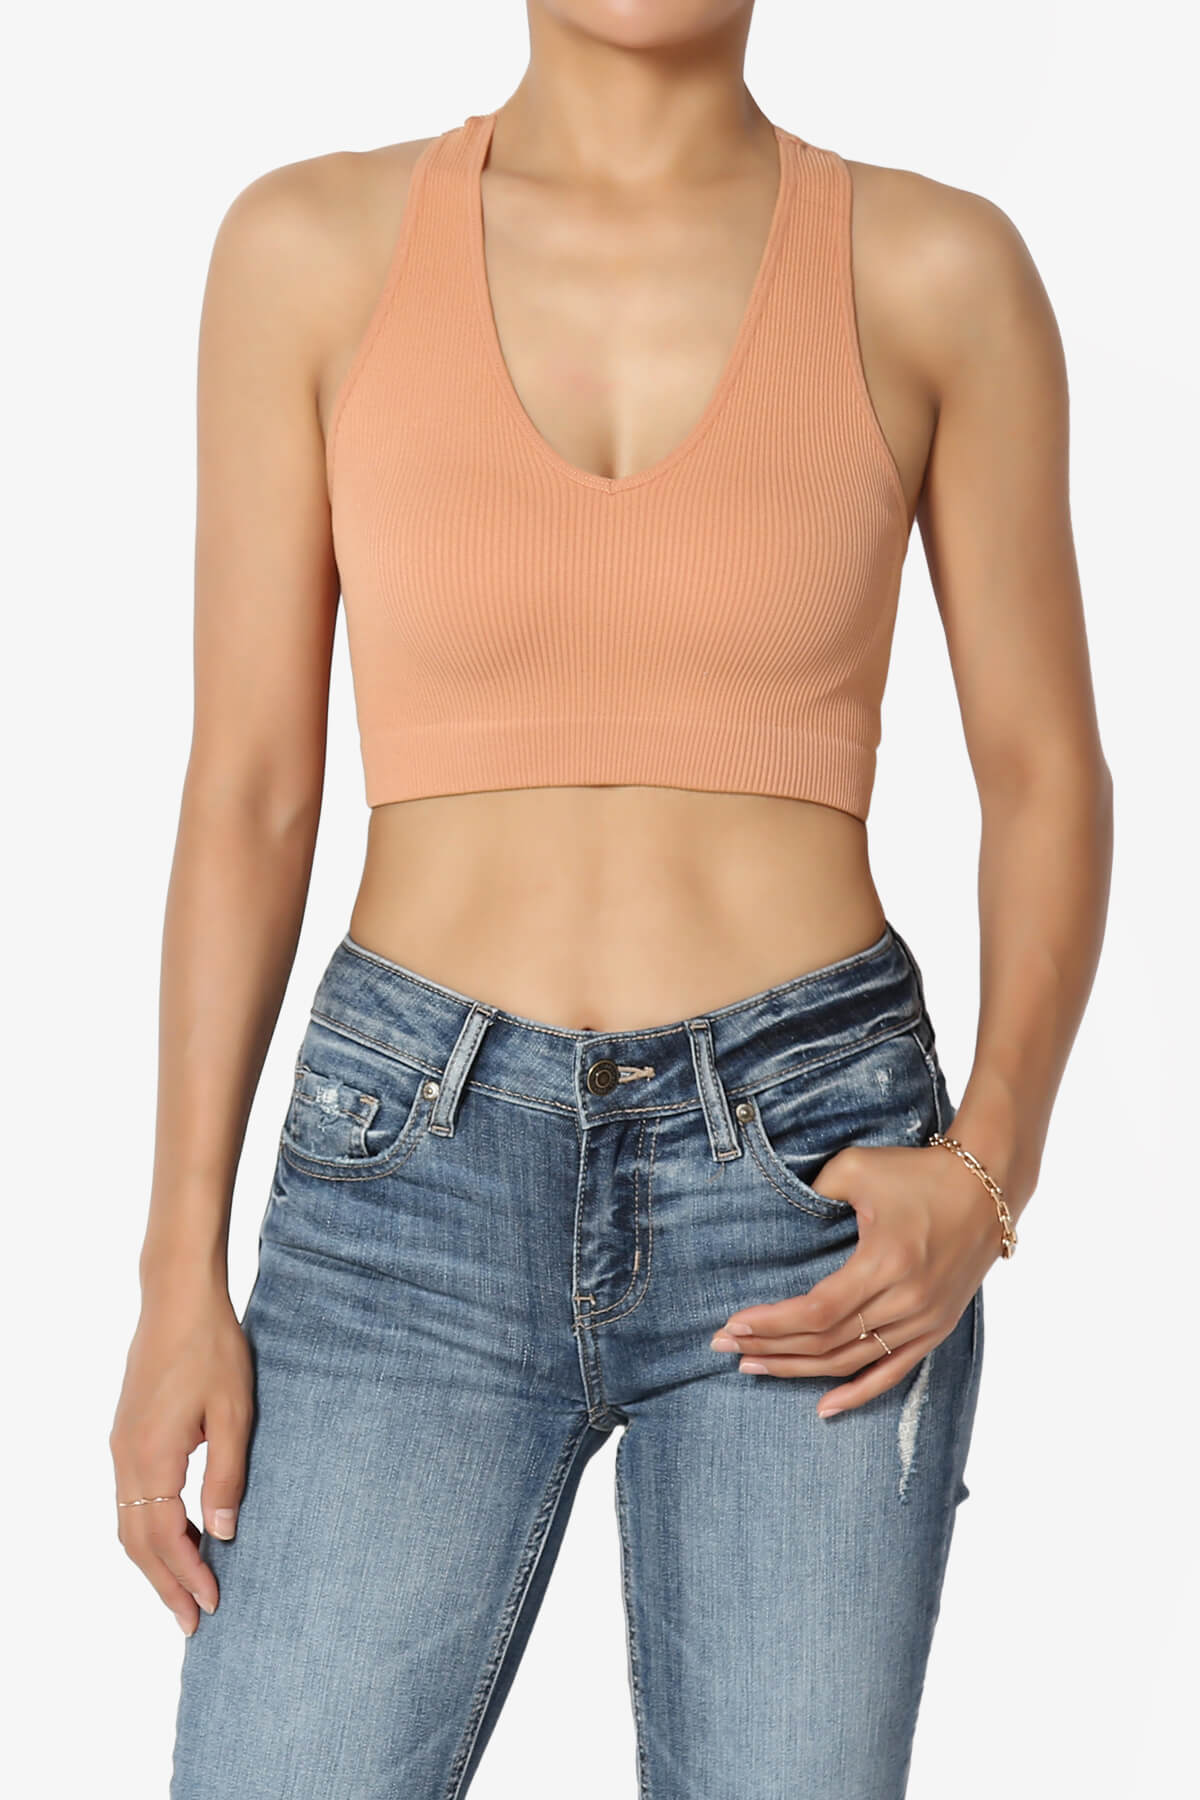 Load image into Gallery viewer, Daliyah Ribbed Seamless Halter Bra Top BUTTER ORANGE_1
